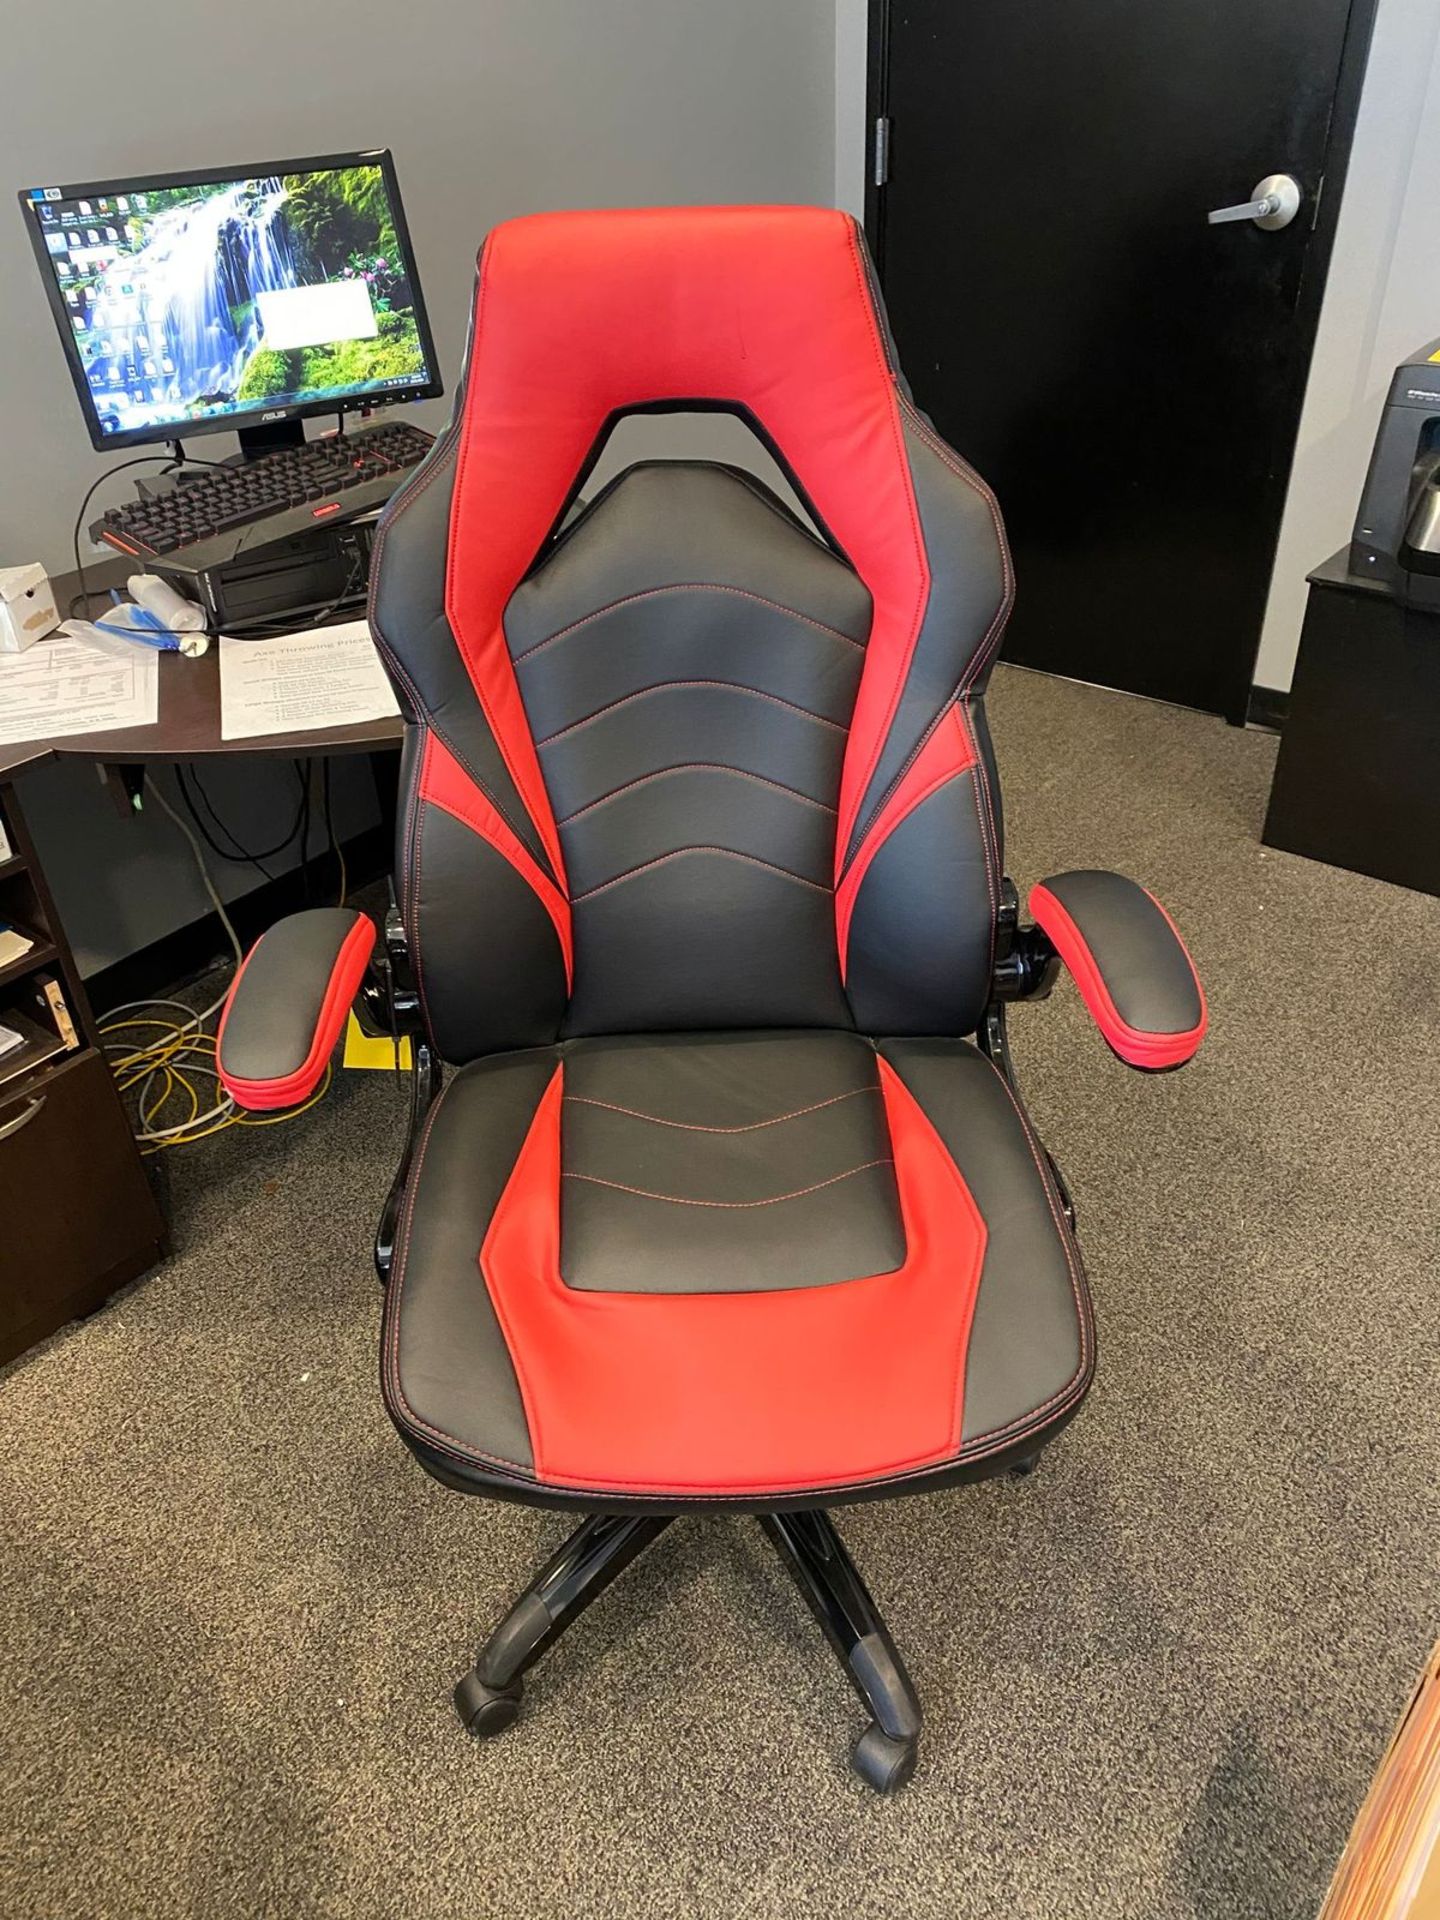 Red & Black Gaming Chair